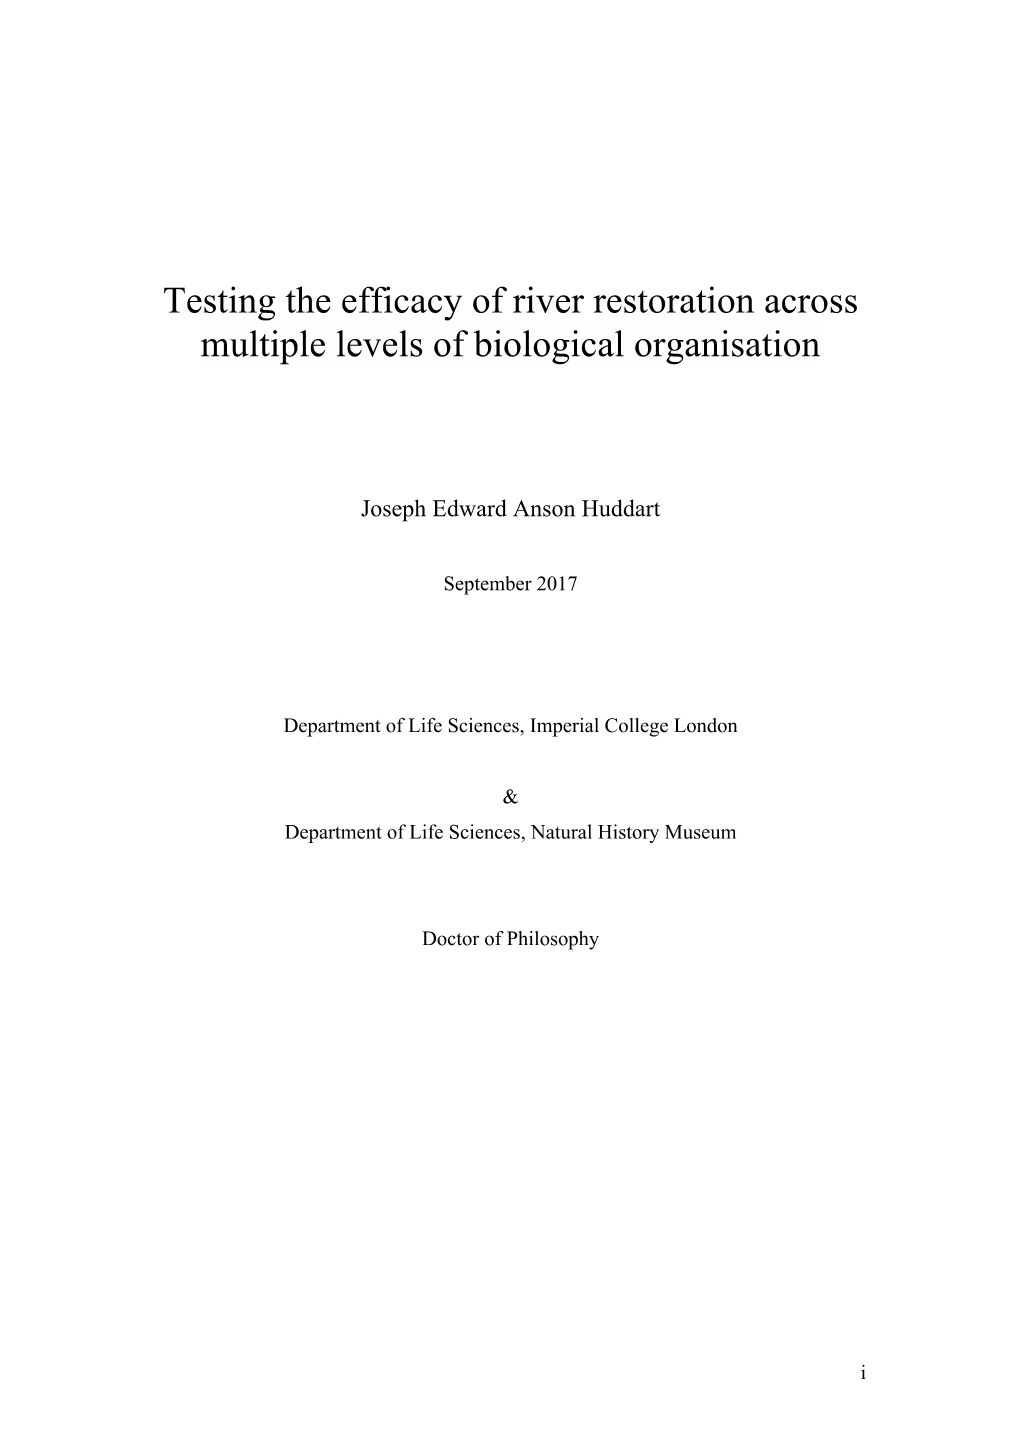 Testing the Efficacy of River Restoration Across Multiple Levels of Biological Organisation